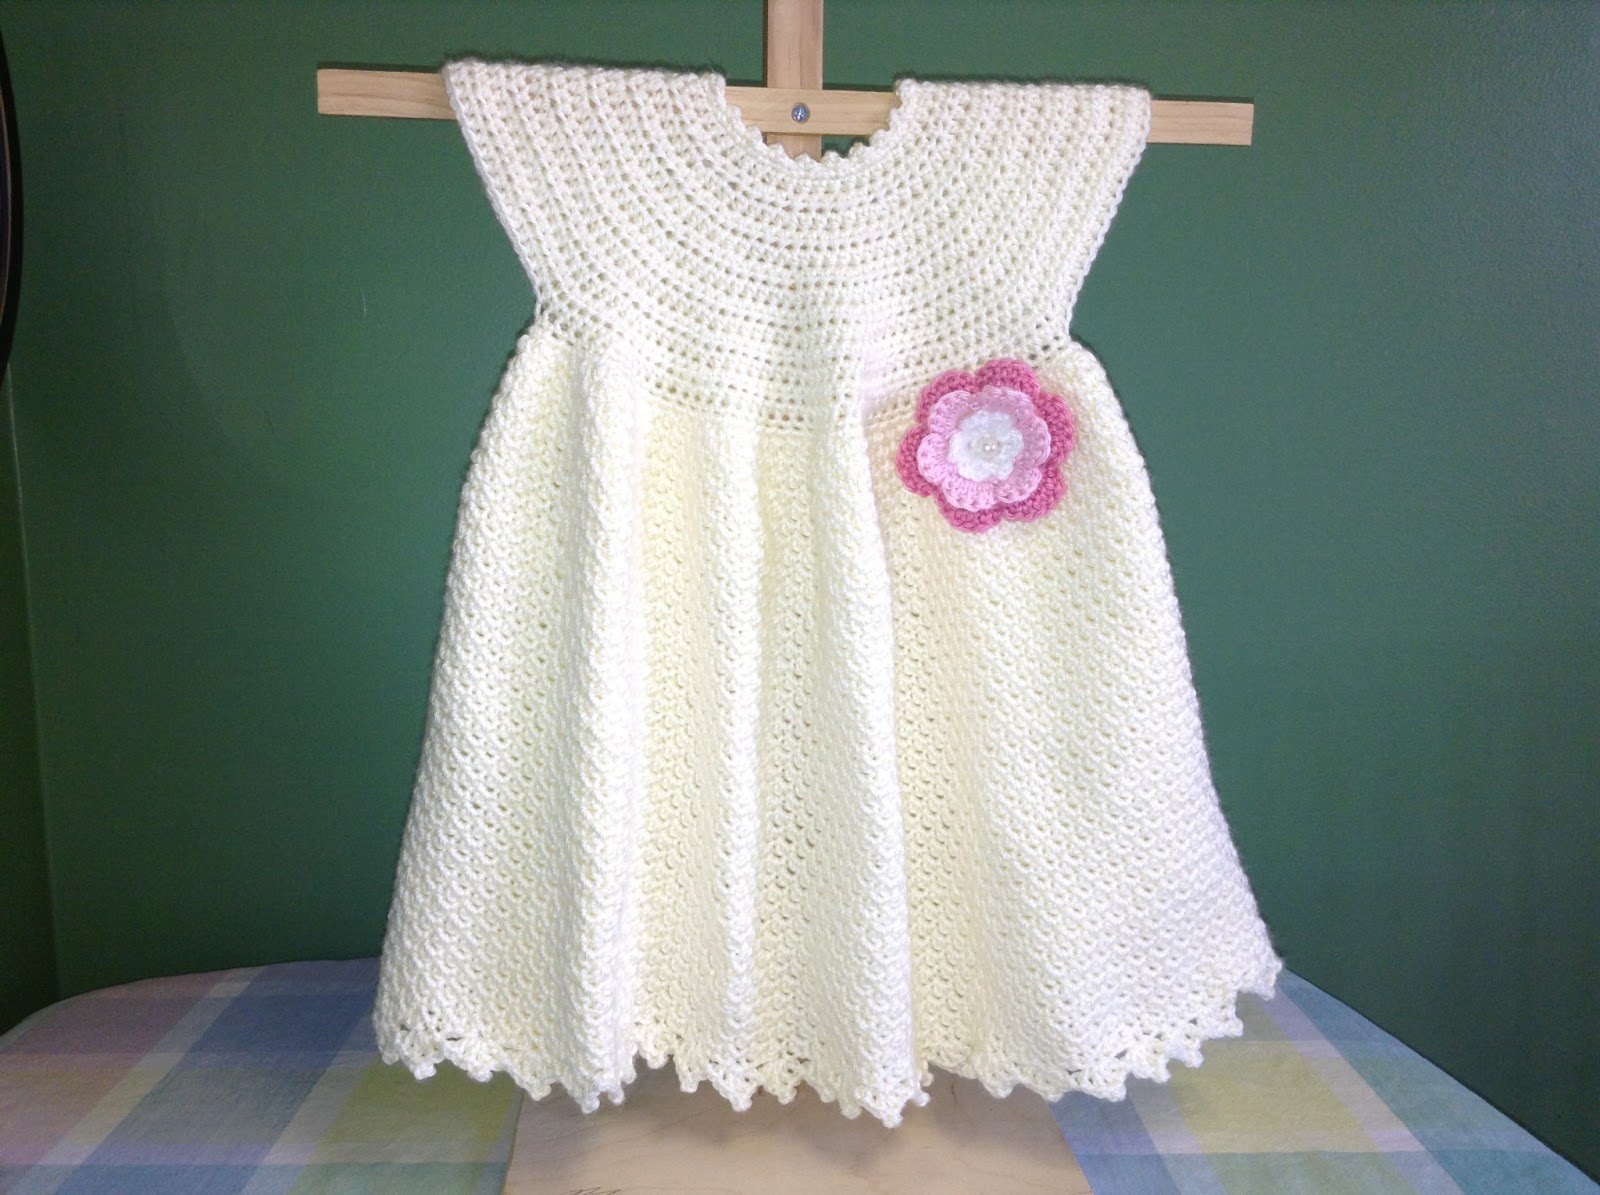 anna-s-free-baby-crochet-dress-patterns-inspiration-and-ideas